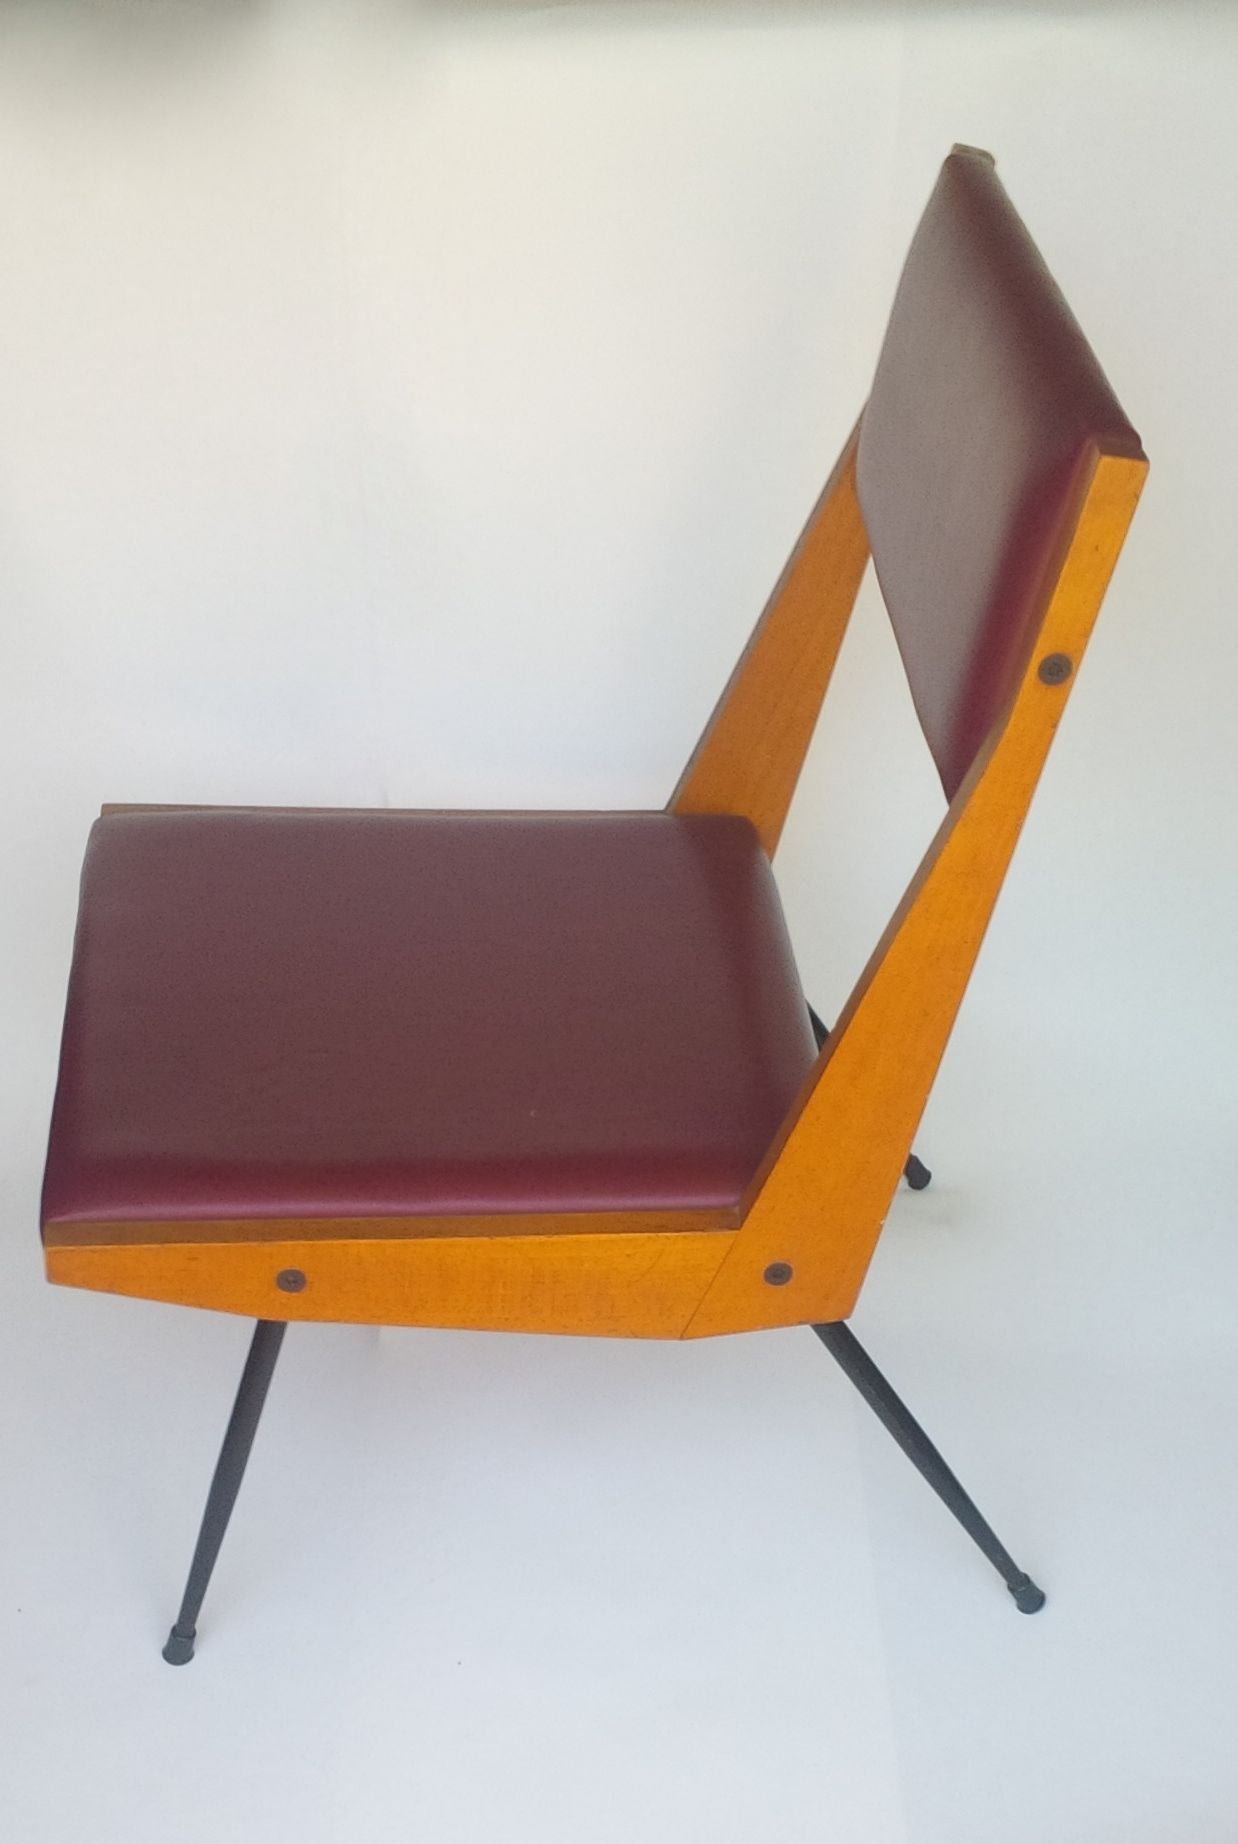 Typical Mid Century Italian slipper chair with interesting lines. The design of the  beechwood frame is very typical for Carlo De Carli, an Italian architect who worled closely with Gio Ponti in the 1940's and 1950's.